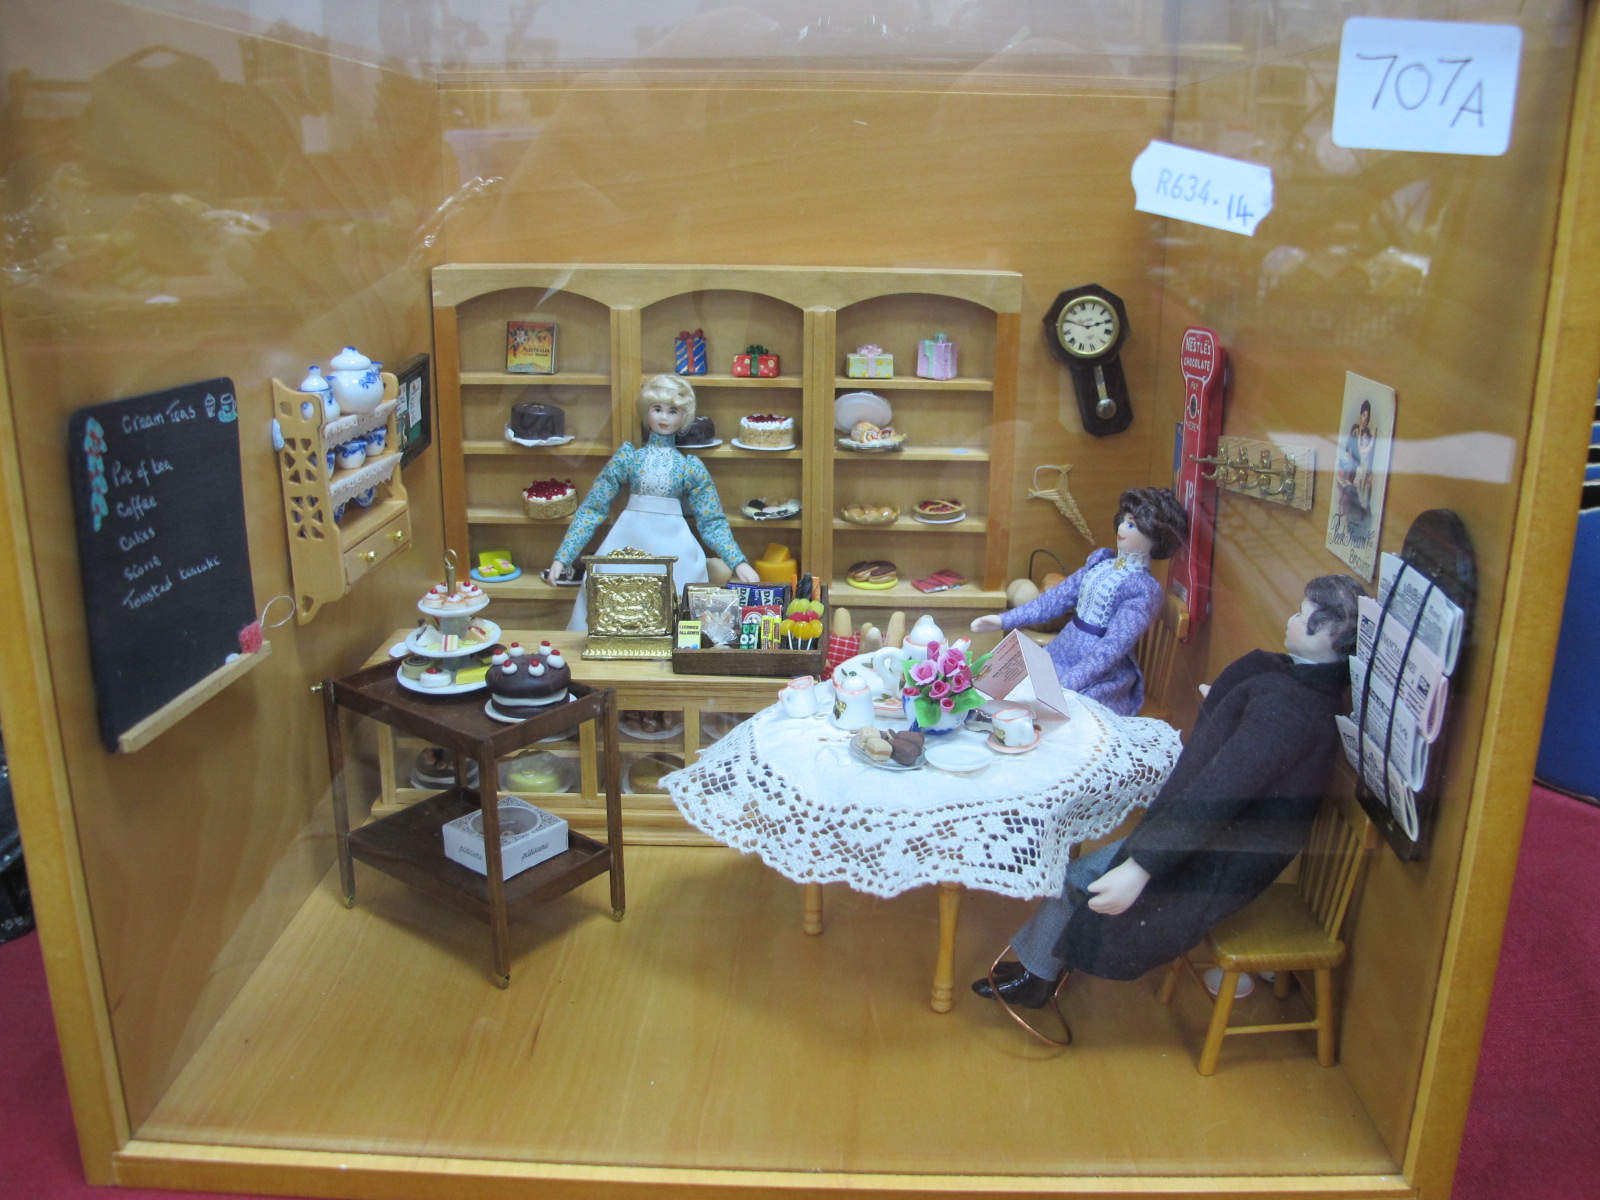 A Bakers Shop/Tea Room Diorama, complete with shop fittings, confectionary counter, table and chairs - Image 2 of 2